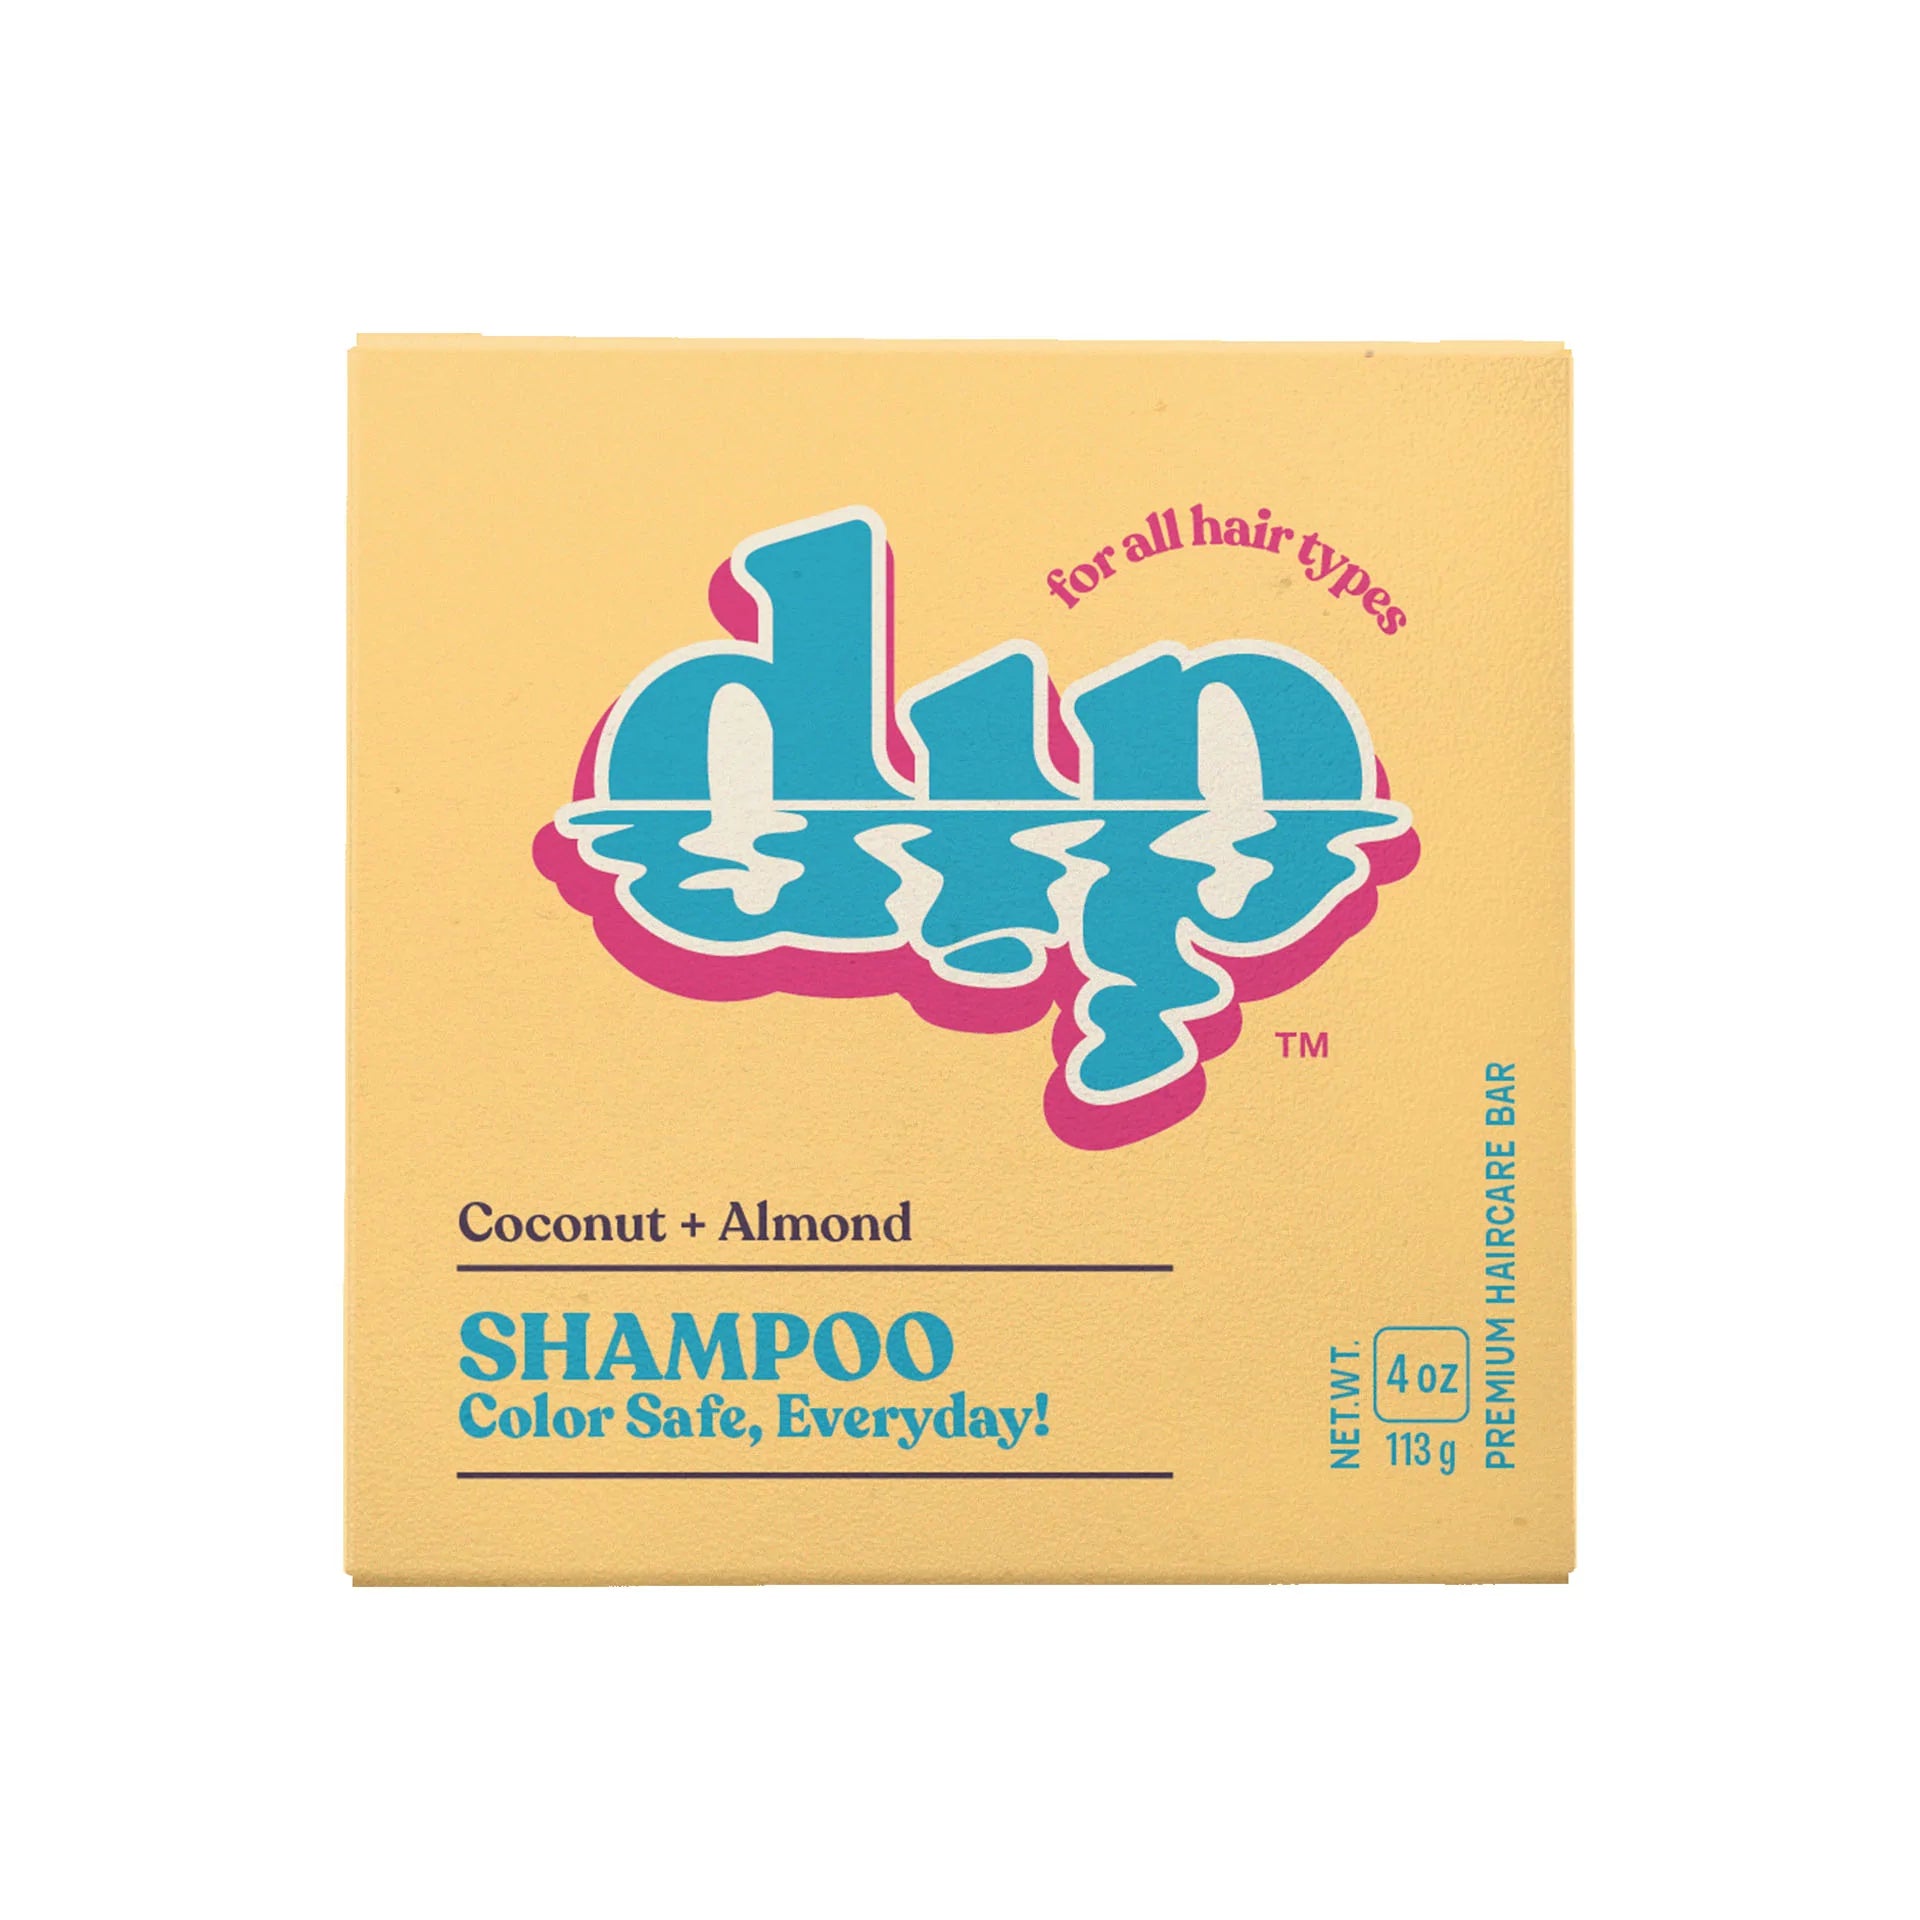 DIP Color Safe Shampoo Bar for Every Day - Coconut & Almond